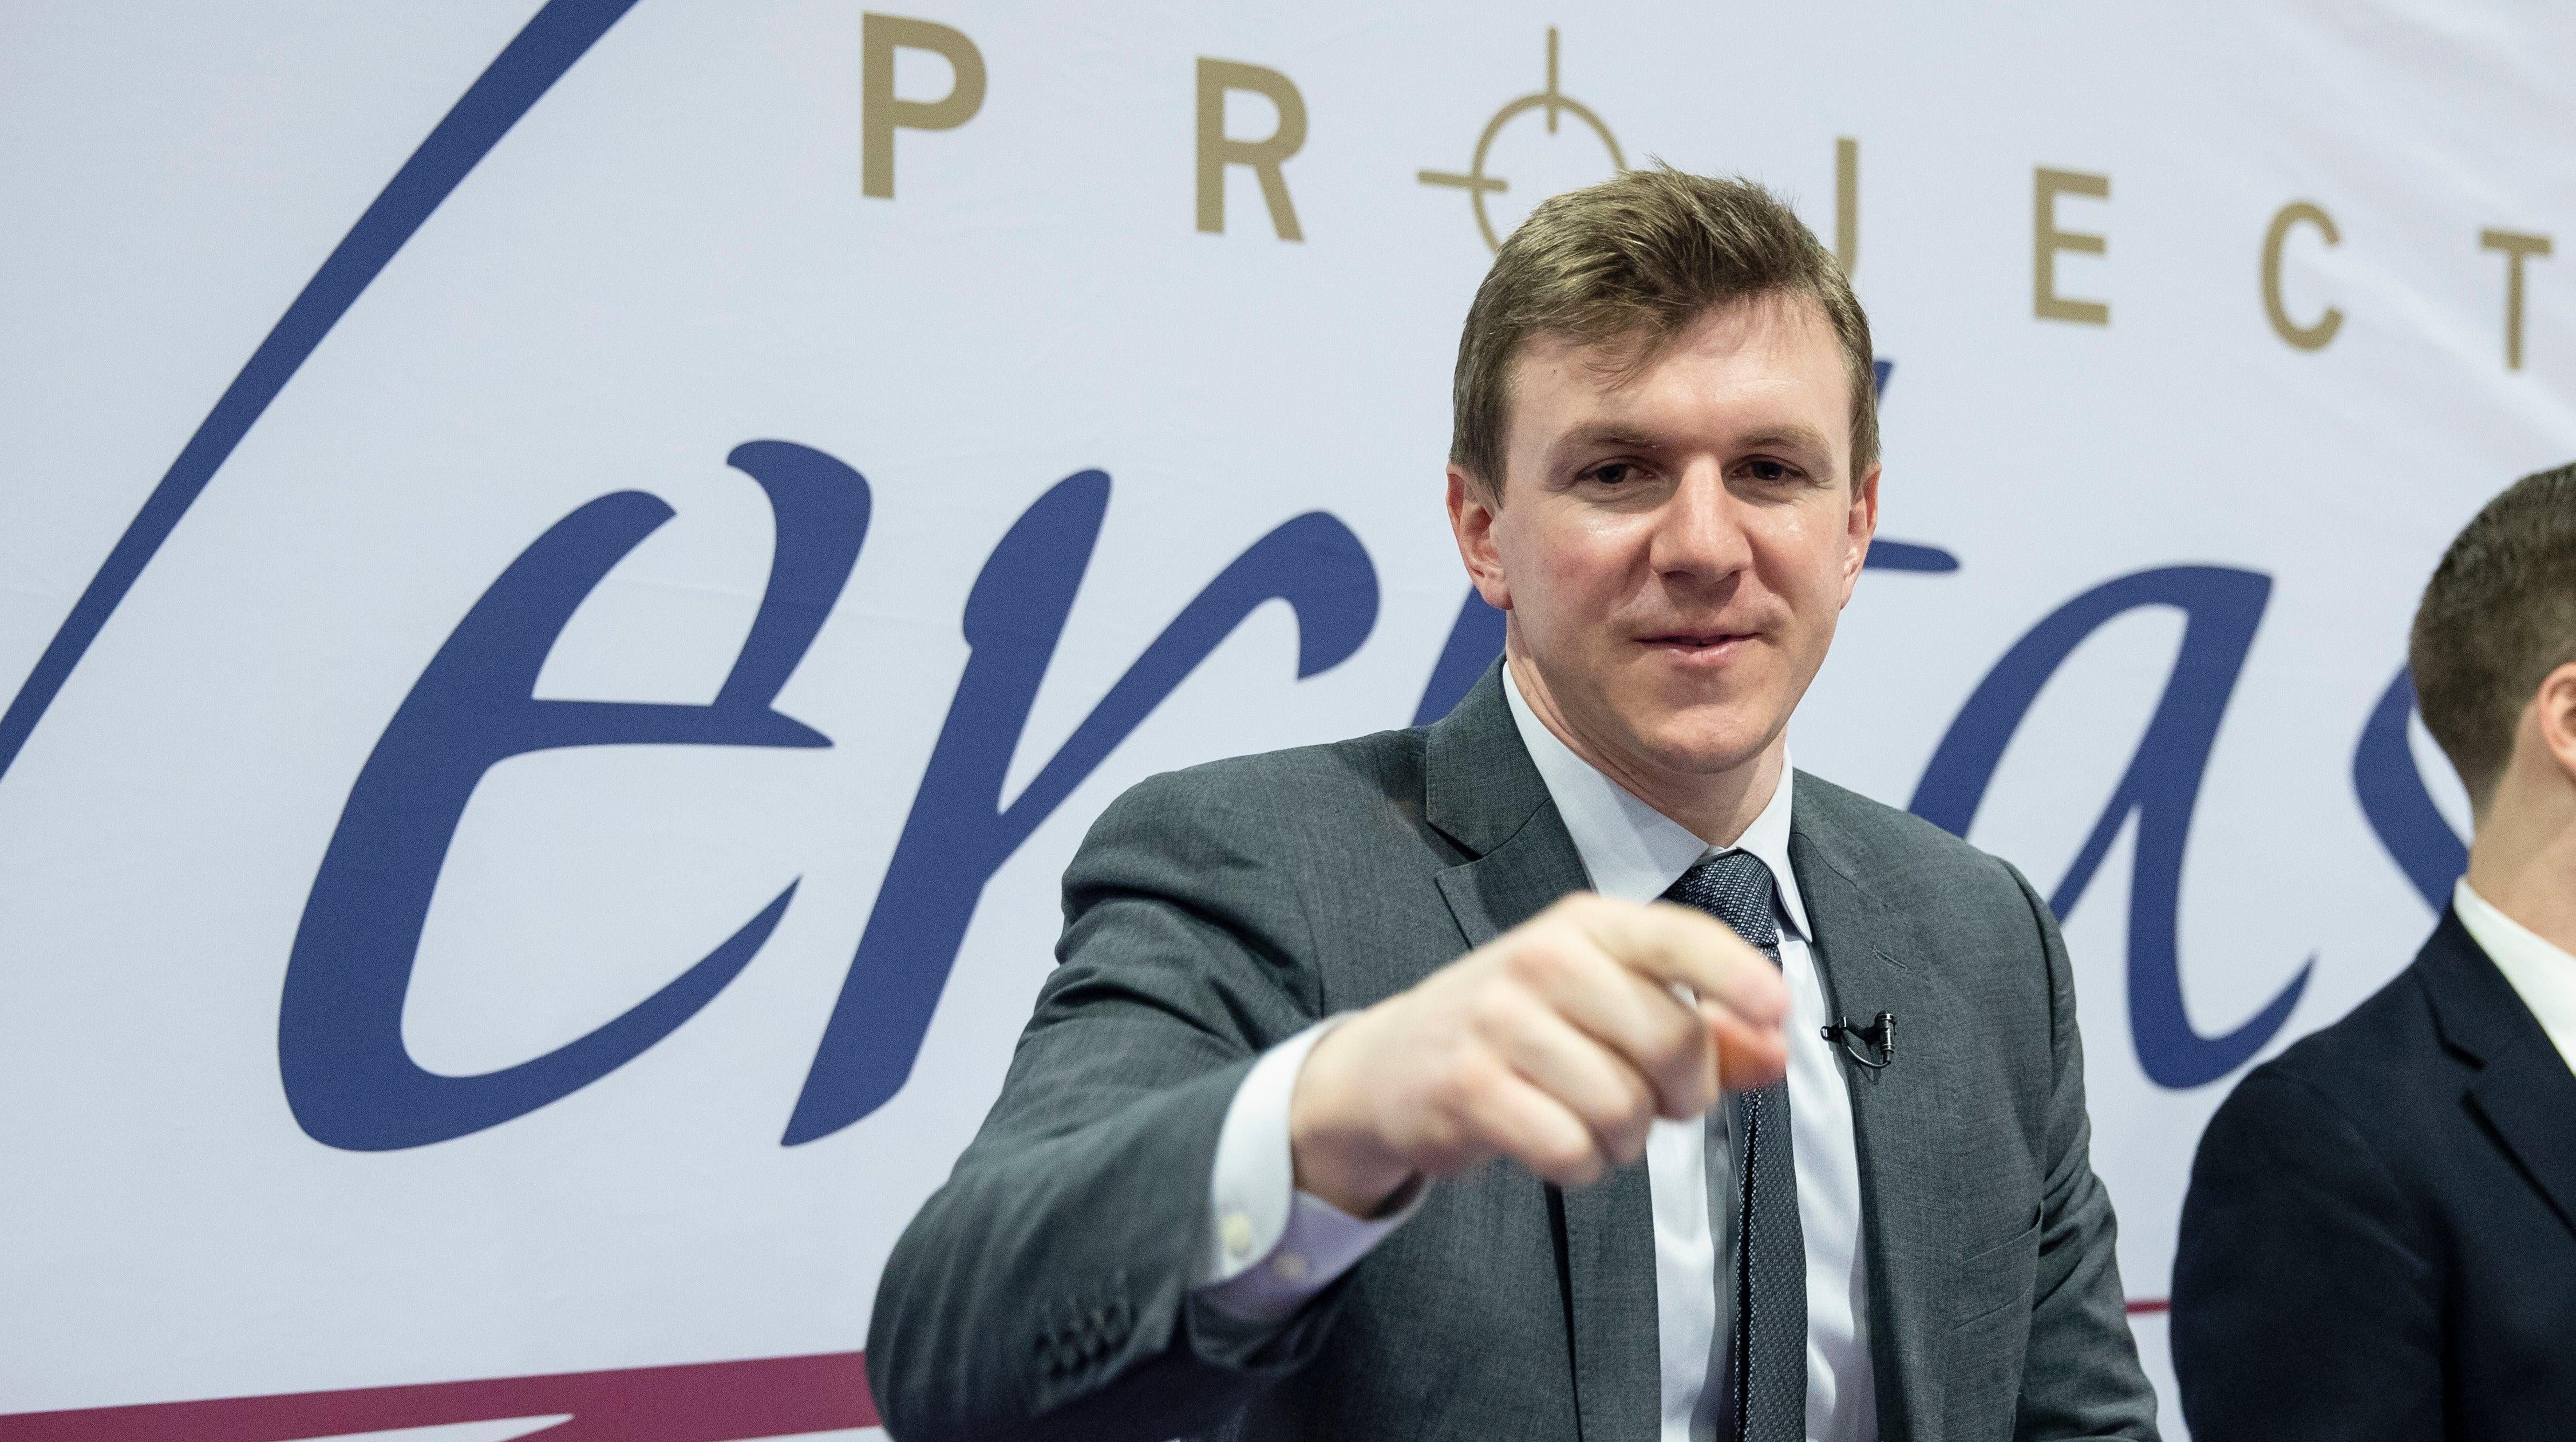 Jury Rules Project Veritas Violated Wiretapping Laws and Fraudulently Misrepresented Themselves